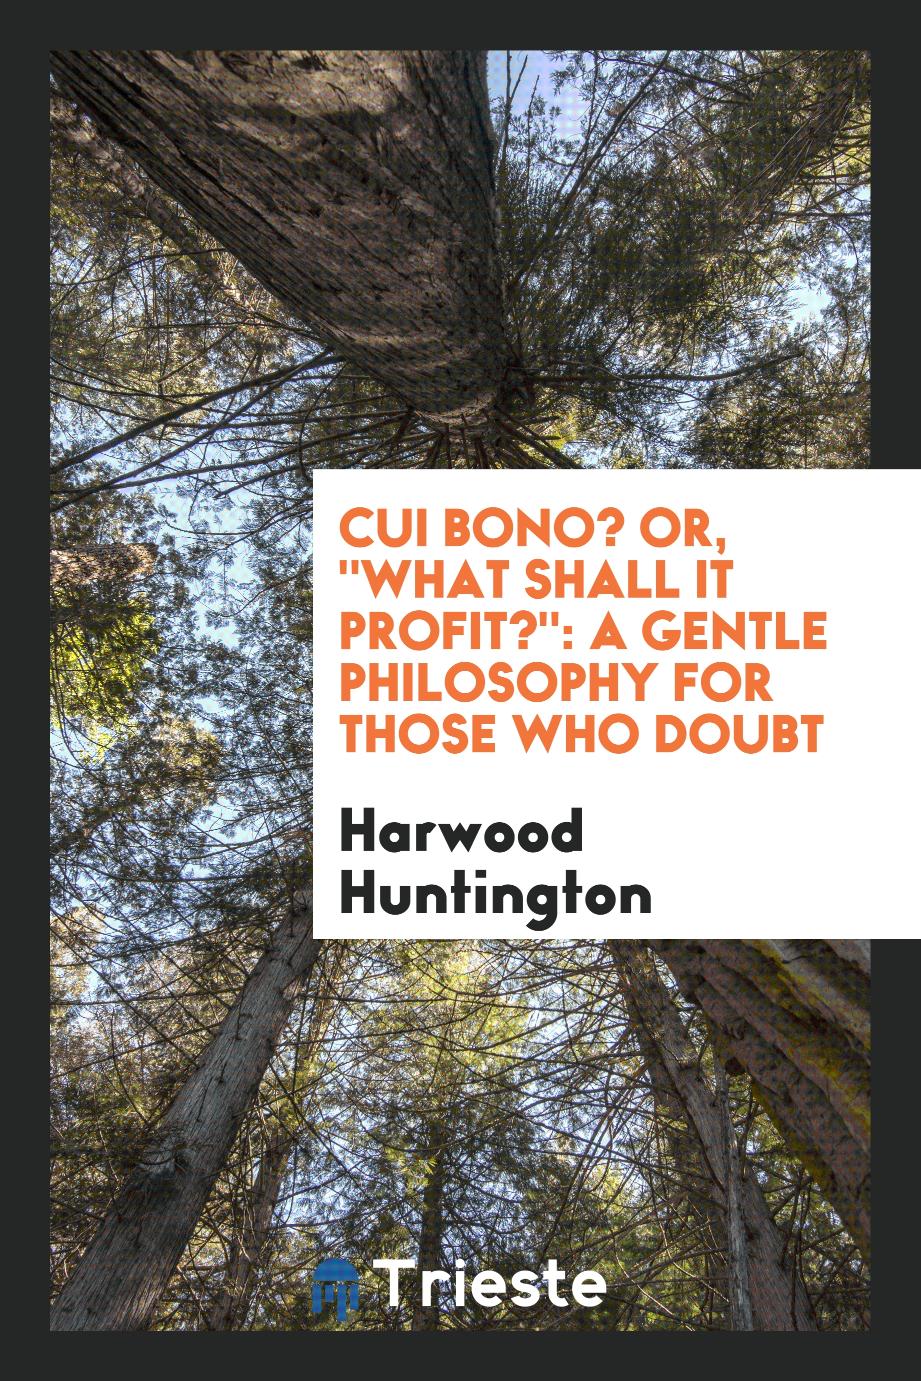 Cui Bono? Or, "What Shall It Profit?": A Gentle Philosophy for Those Who Doubt